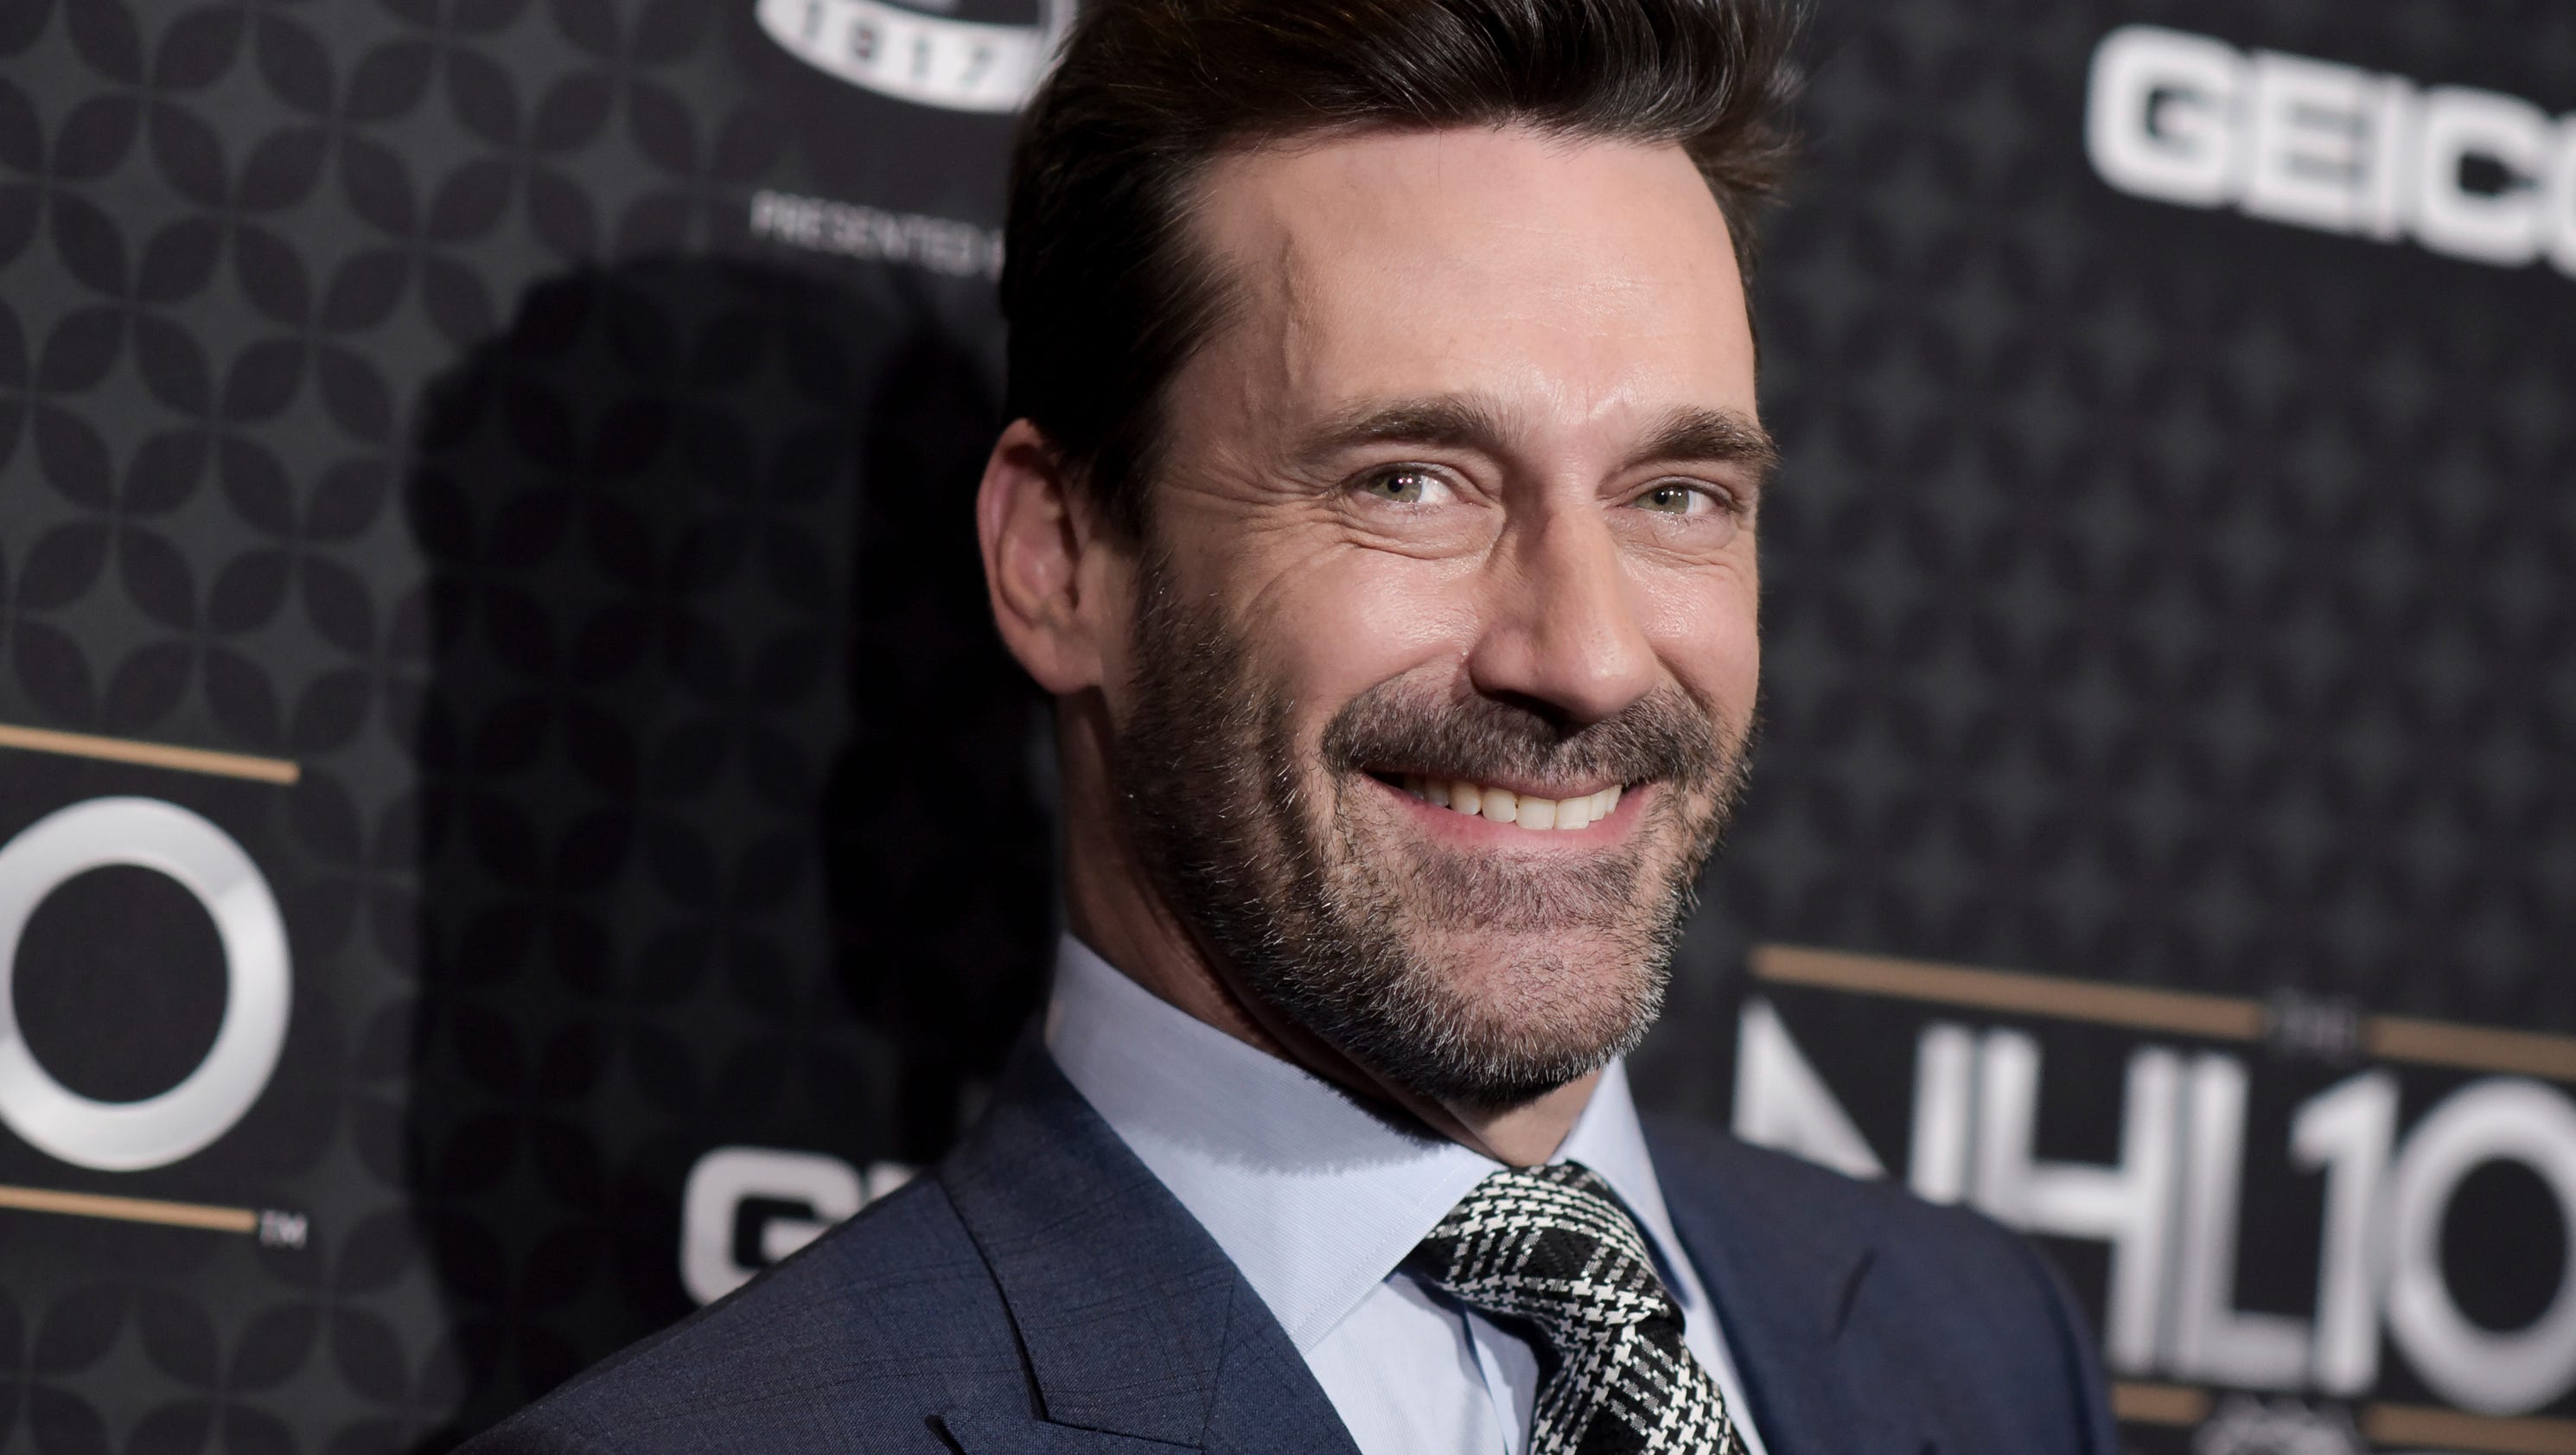 Jon Hamm to play tennis for charity in Rancho Mirage - The Desert Sun